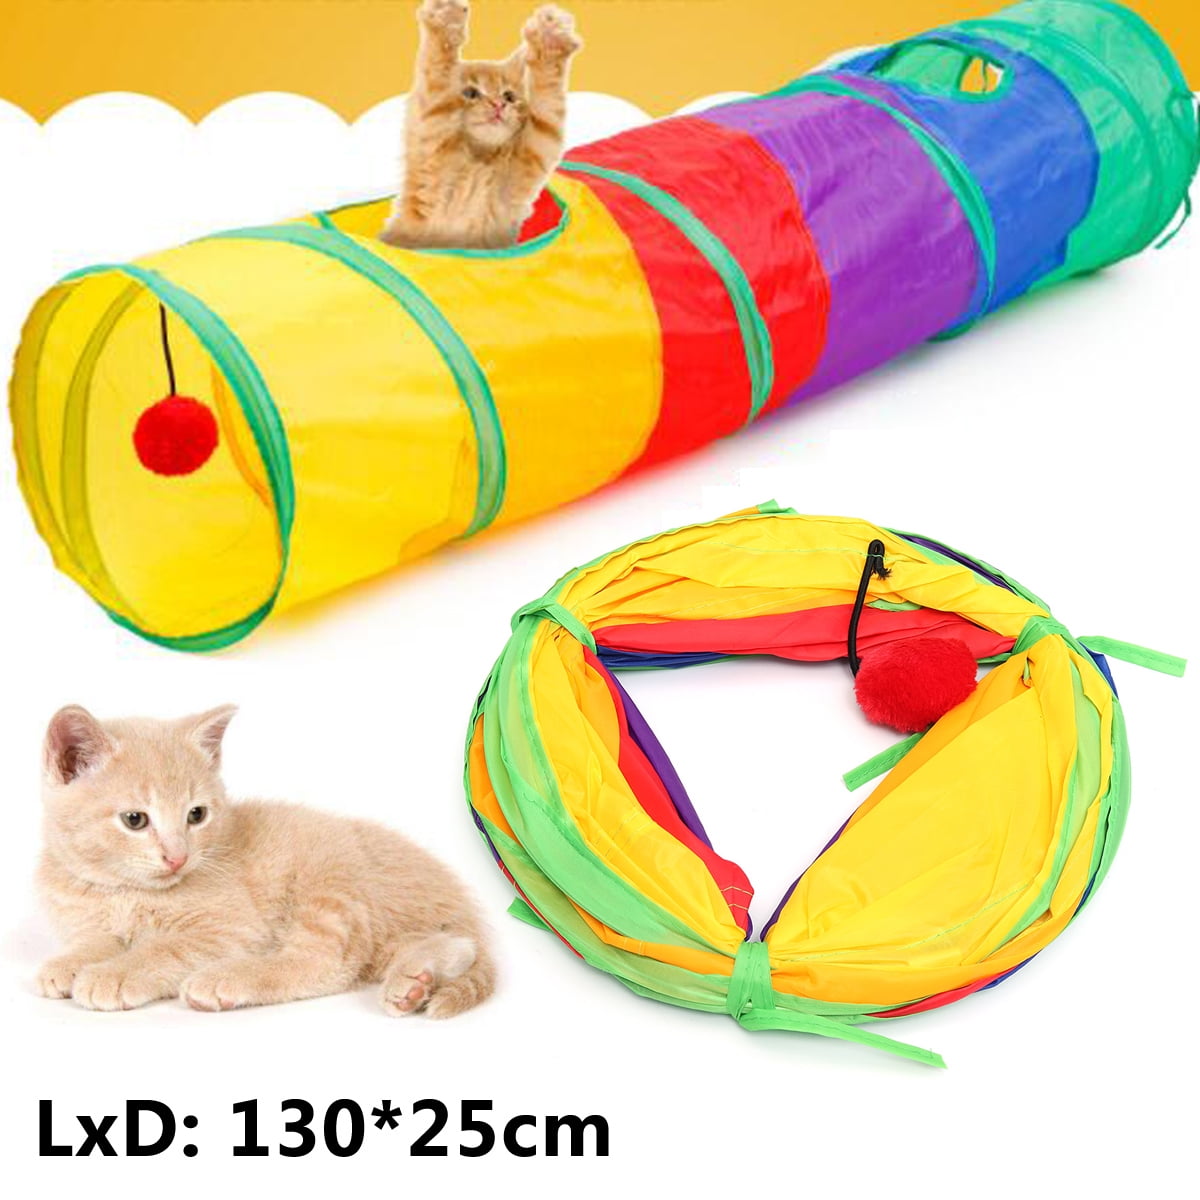 LAPOND Pet Cat Tunnel,Collapsible 3 Way Cat Toys Play Tunnel Christmas Santa Pants Cat Tube,Great Toy for Cats & Rabb 